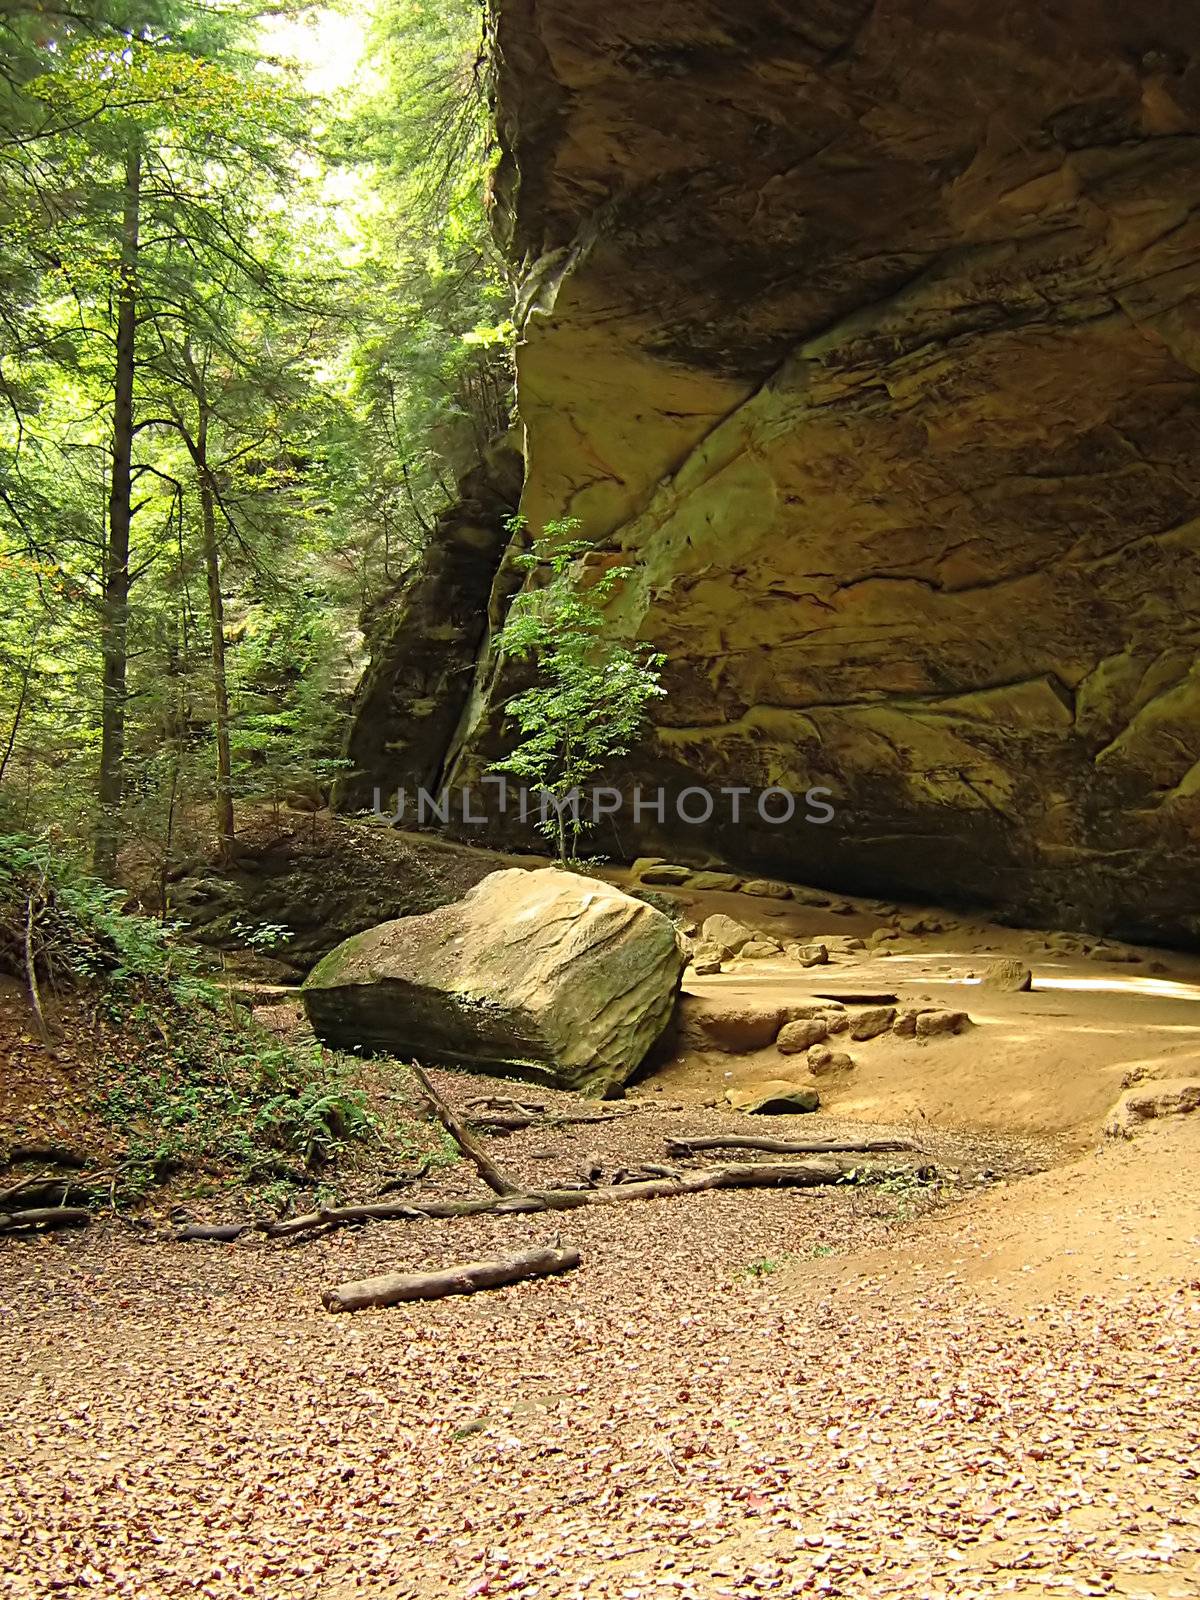 A photograph of Ash Cave at Hocking Hills State Park located in the state of Ohio in the United States.